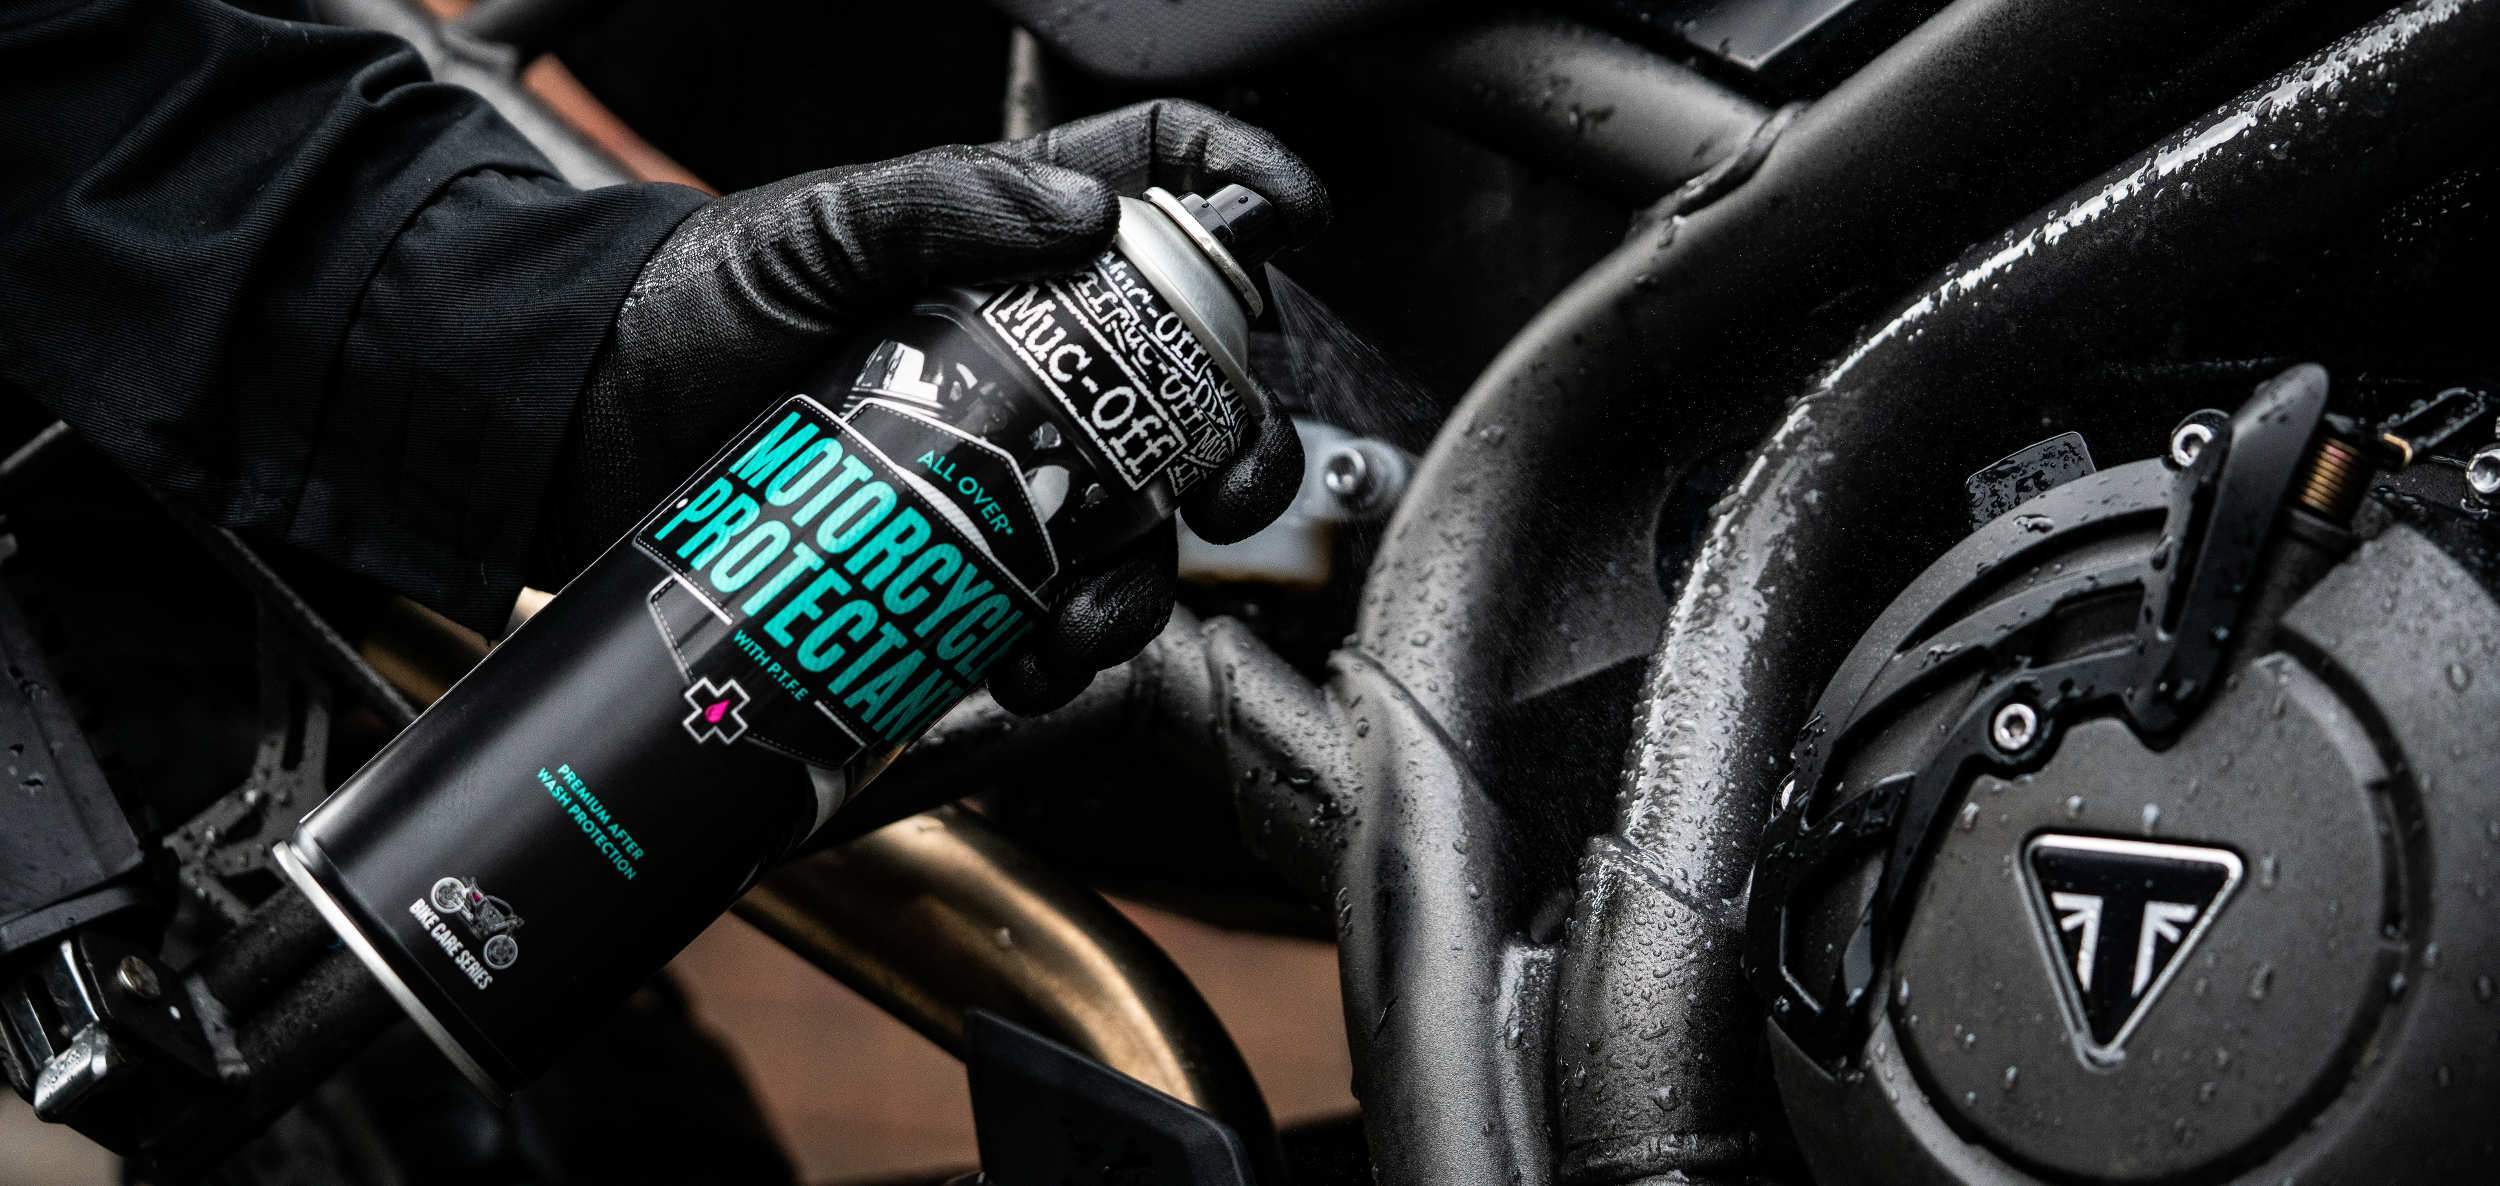 This Cover Could Protect Your Bike From Rust Over The Winter